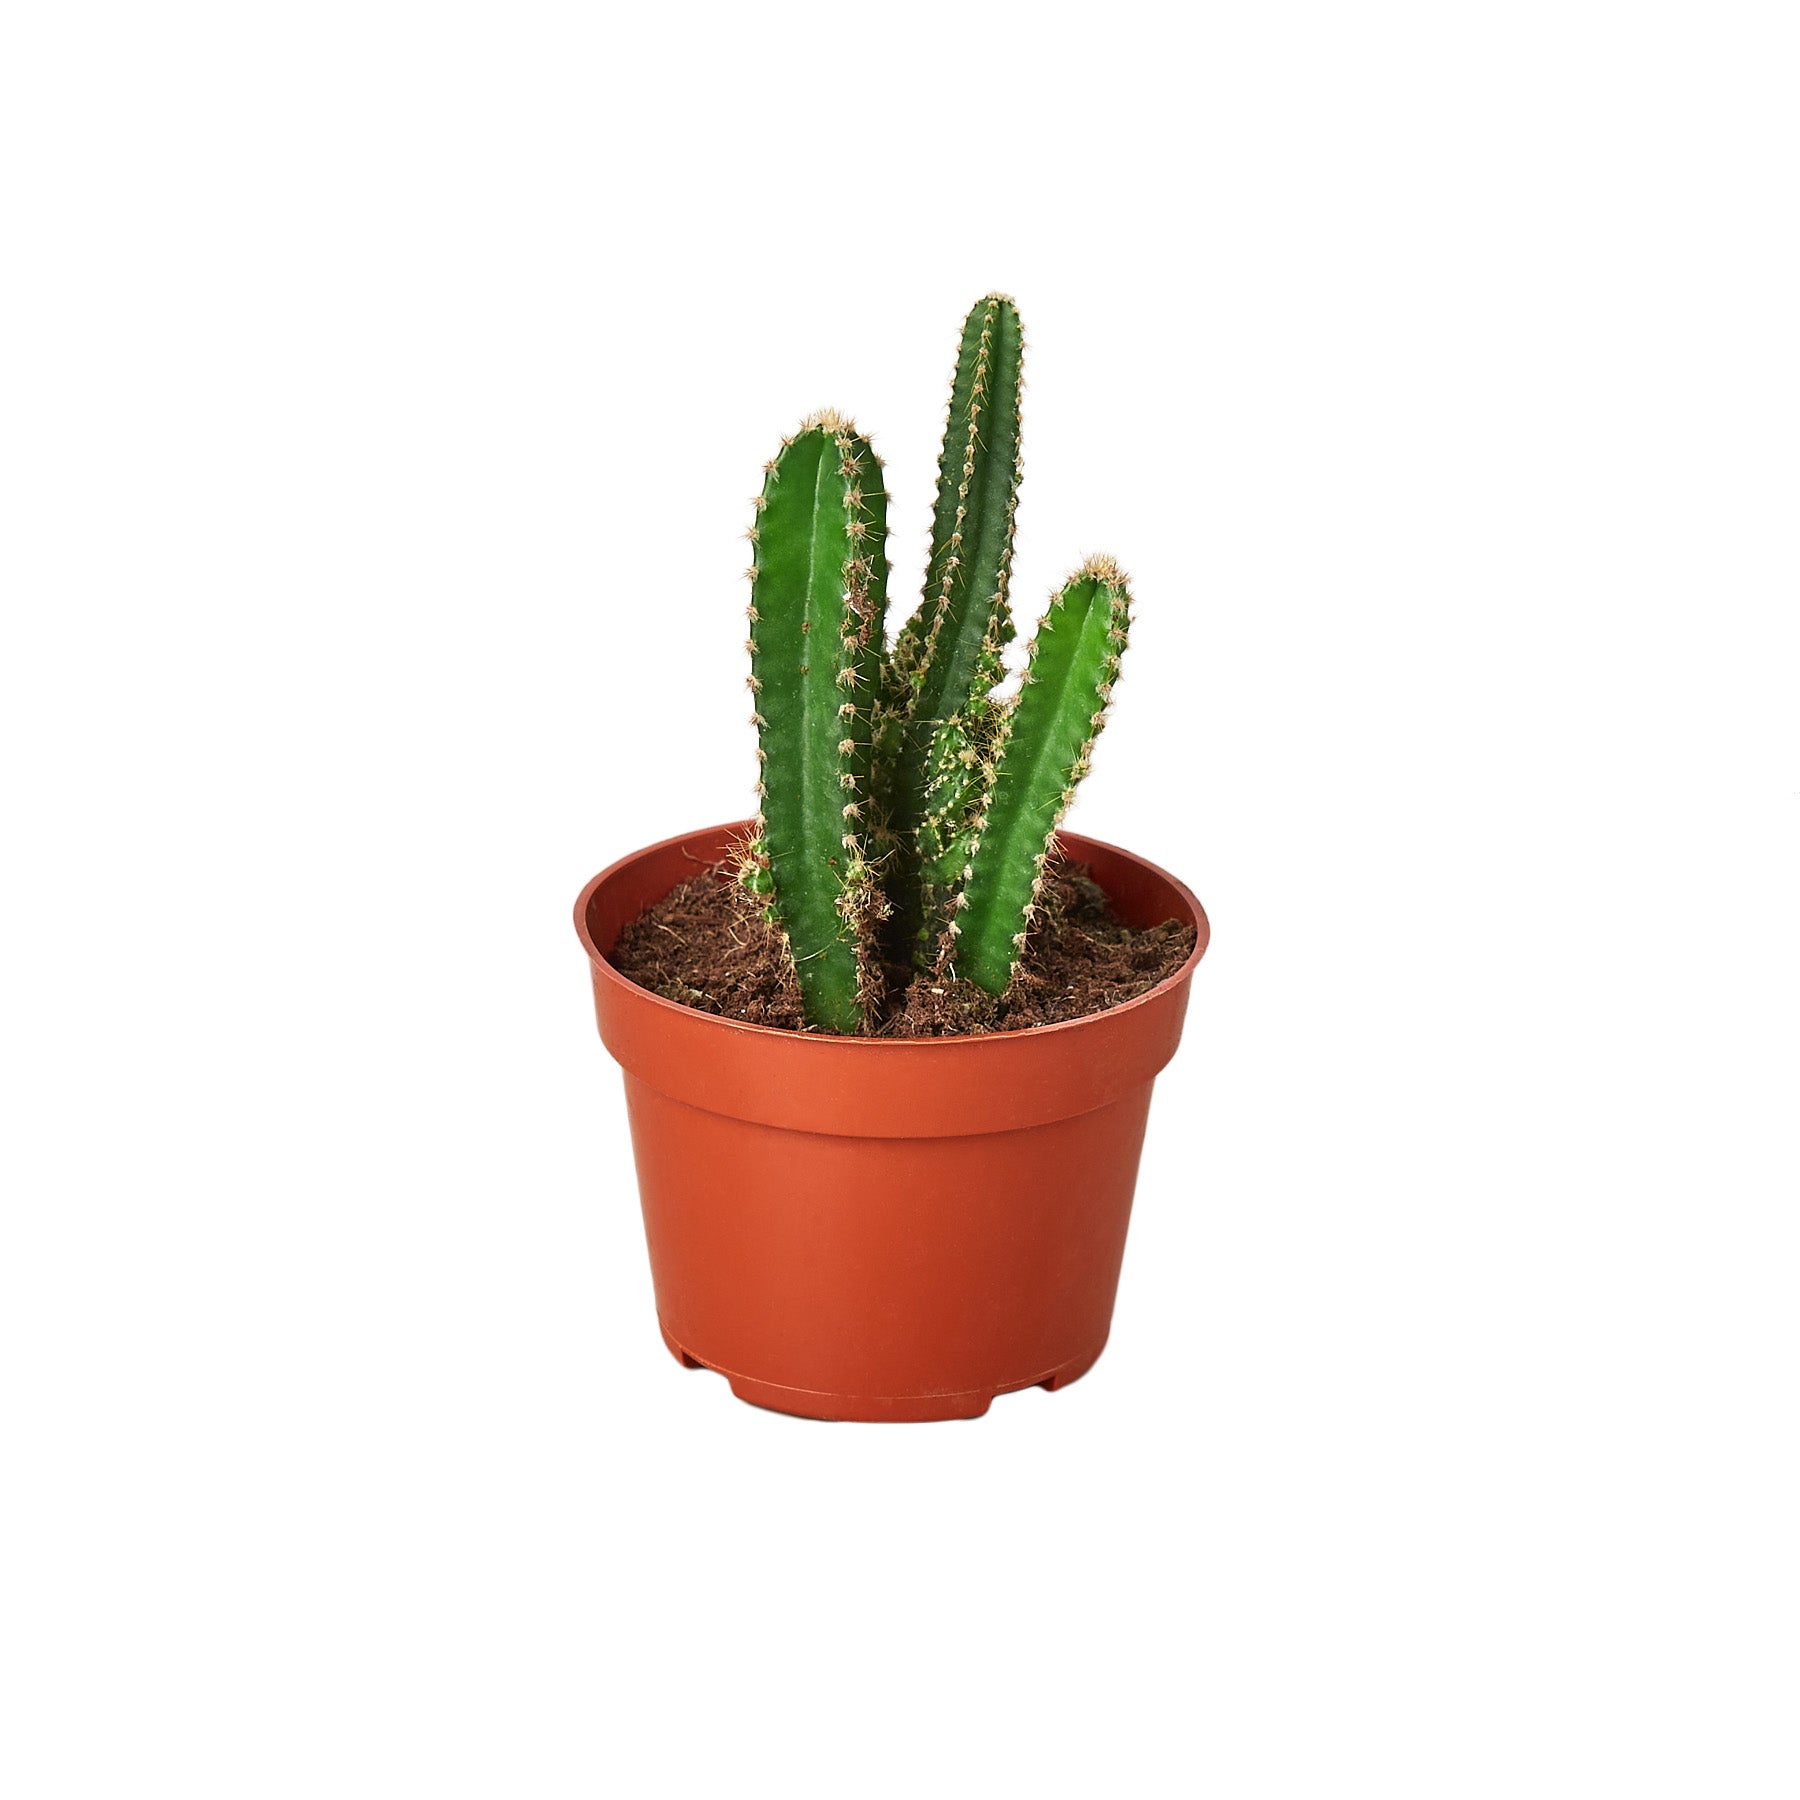 A cactus in a pot on a white background, purchased from one of the best plant nurseries near me.